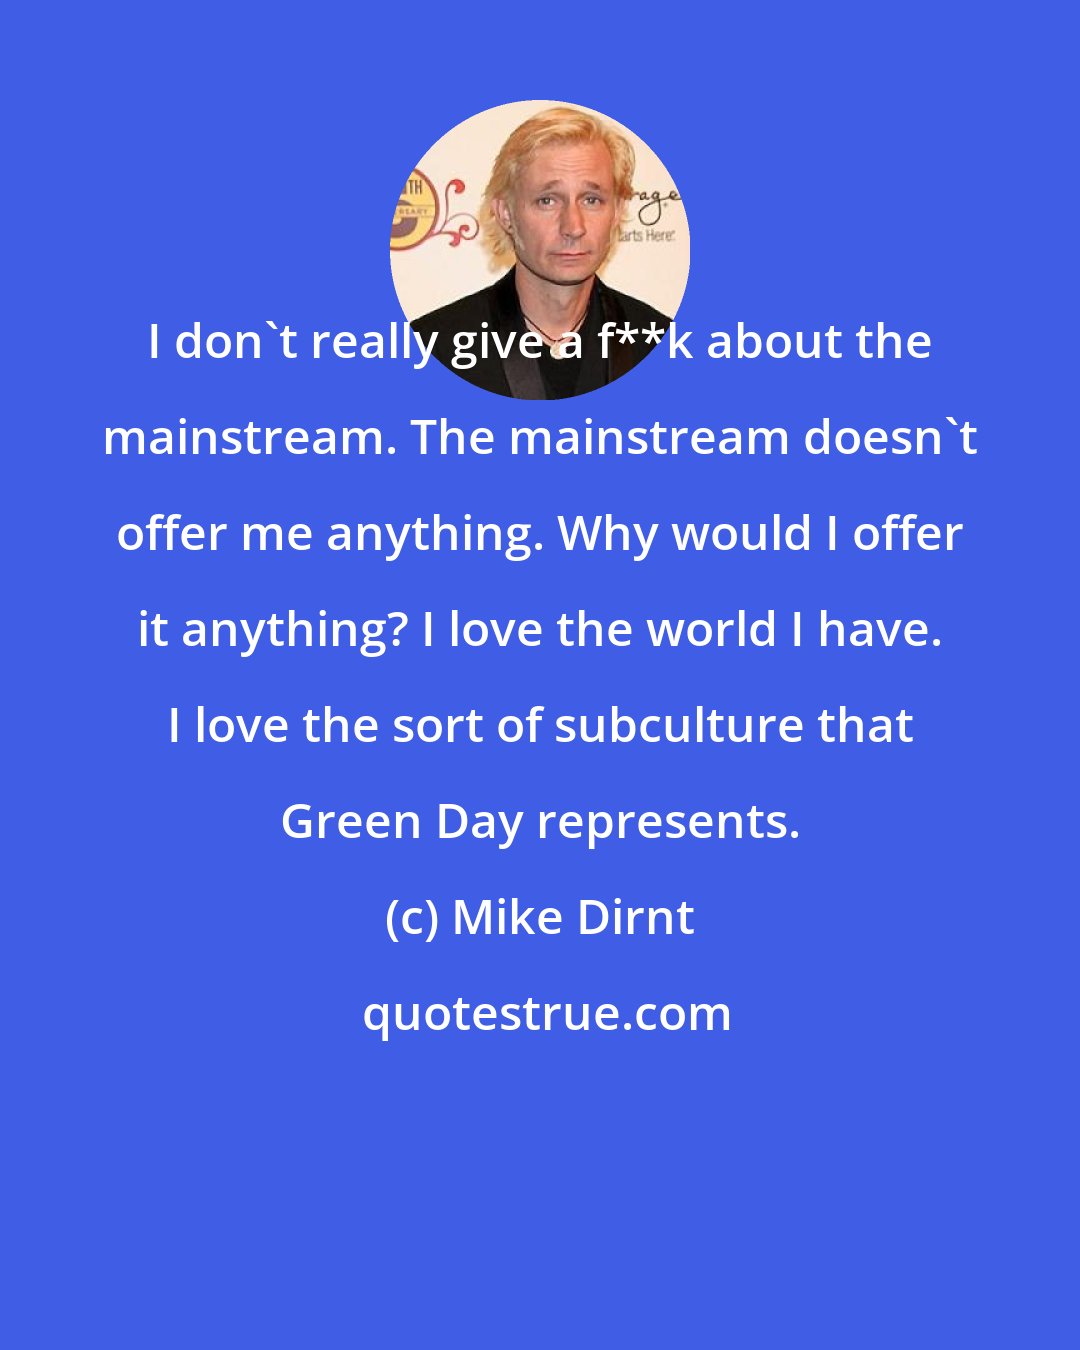 Mike Dirnt: I don't really give a f**k about the mainstream. The mainstream doesn't offer me anything. Why would I offer it anything? I love the world I have. I love the sort of subculture that Green Day represents.